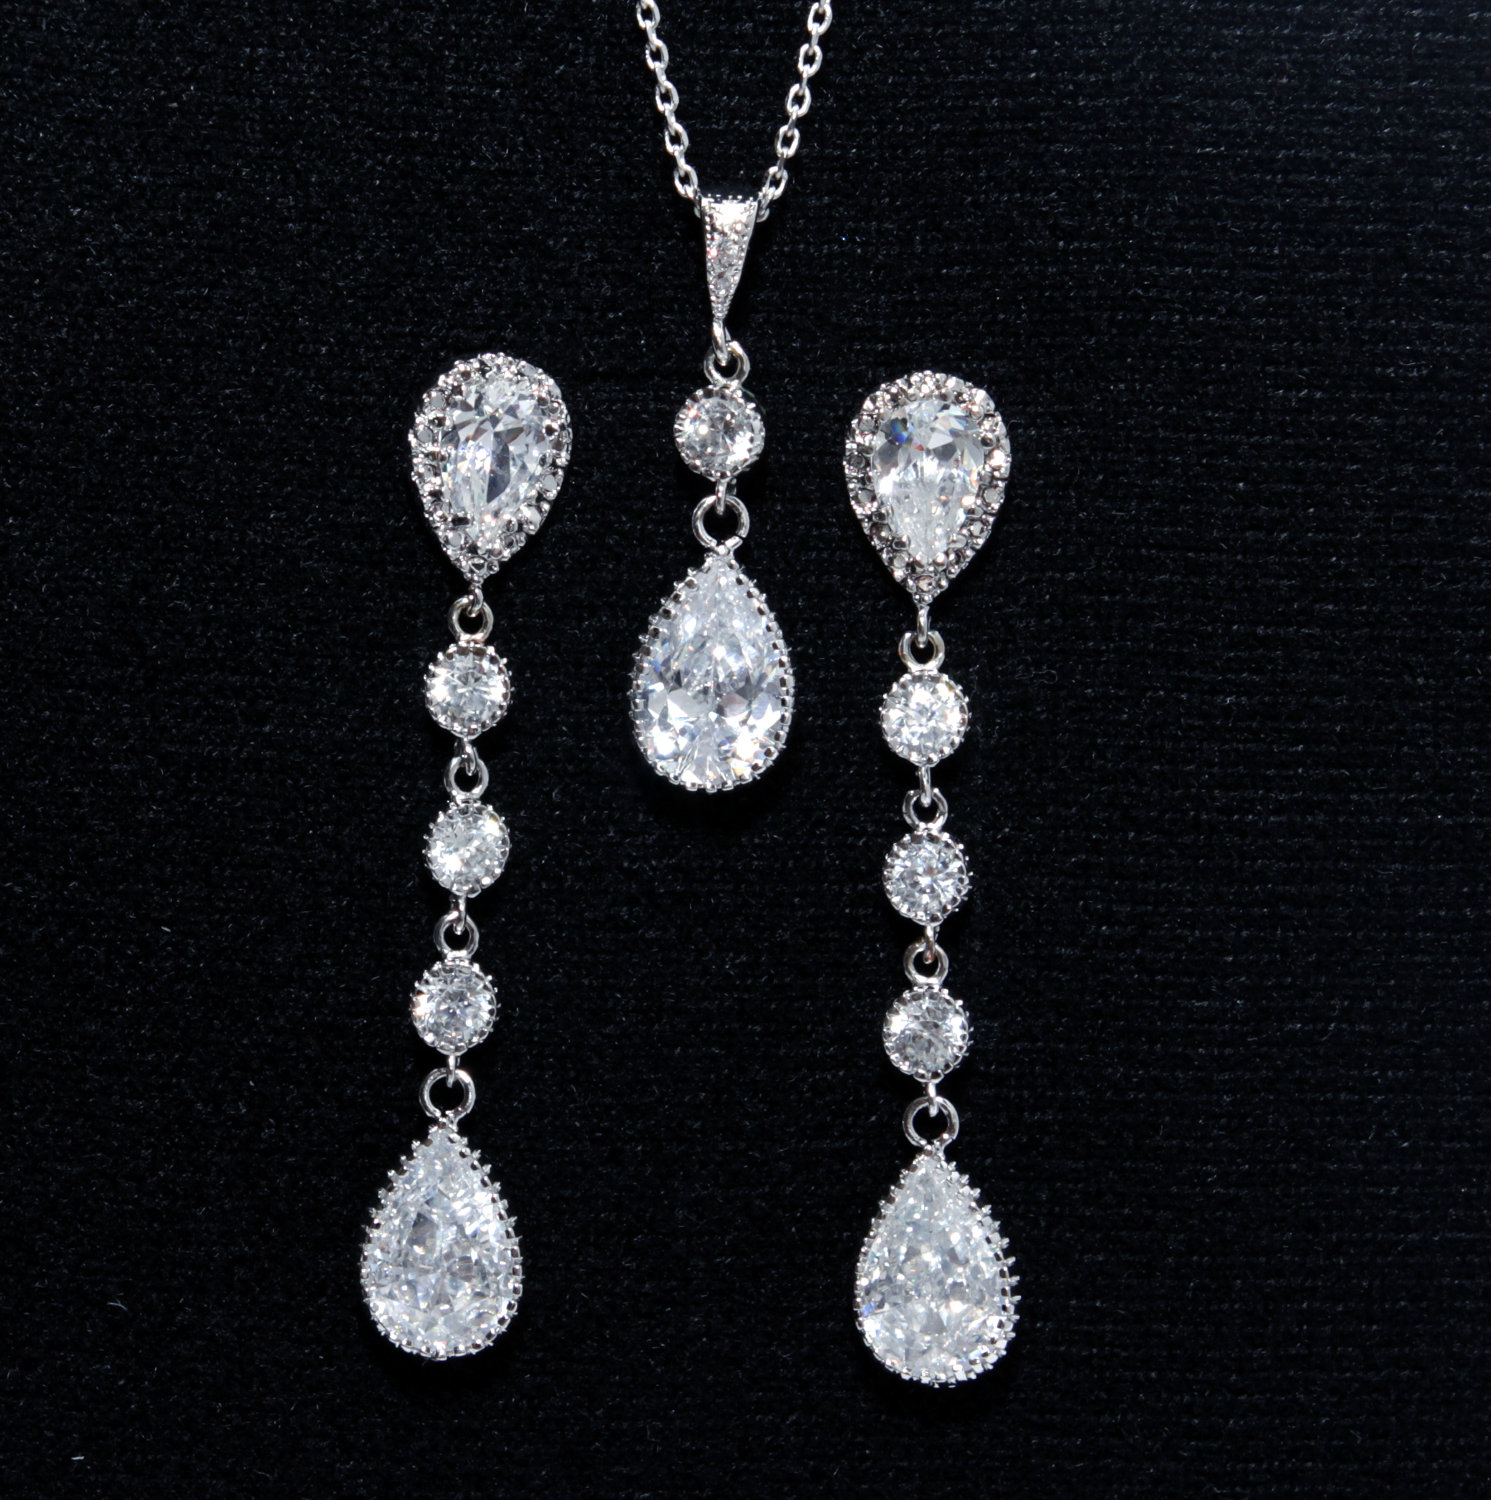 Cubic Zirconia Earring & Necklace set from Glitz & Love